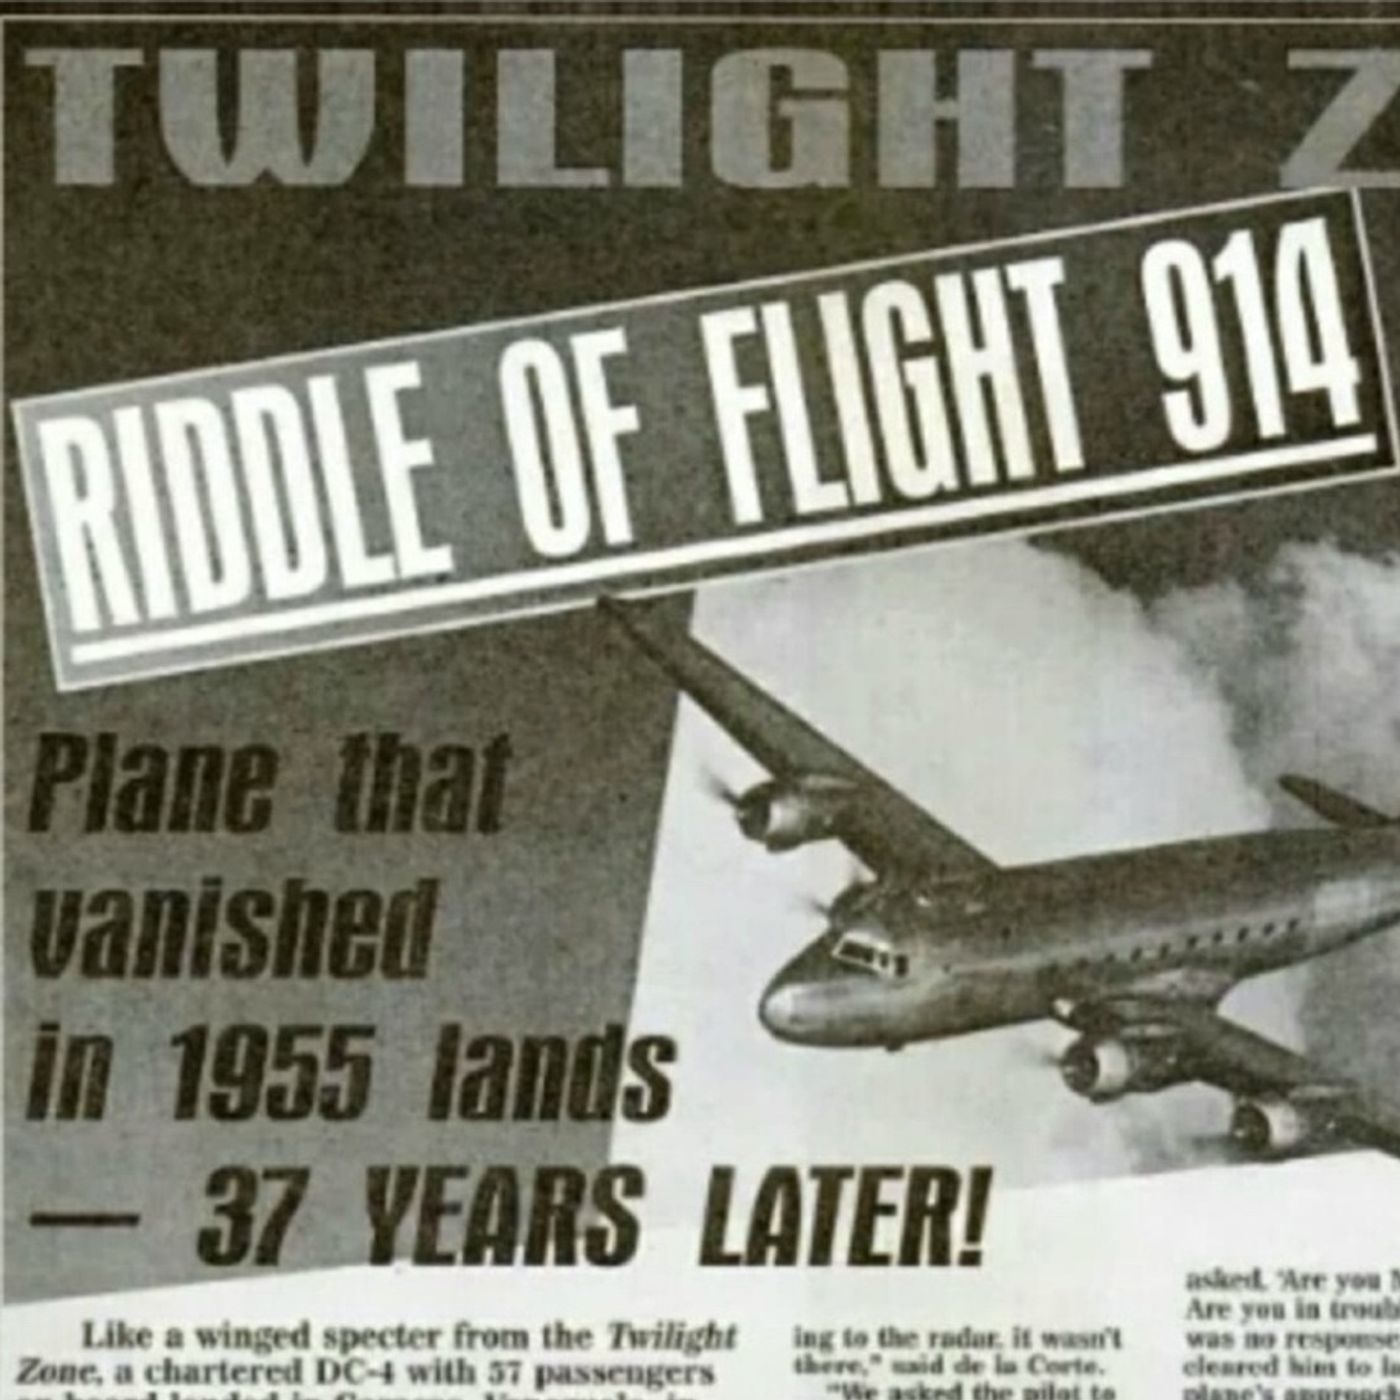 What happened to flight 914